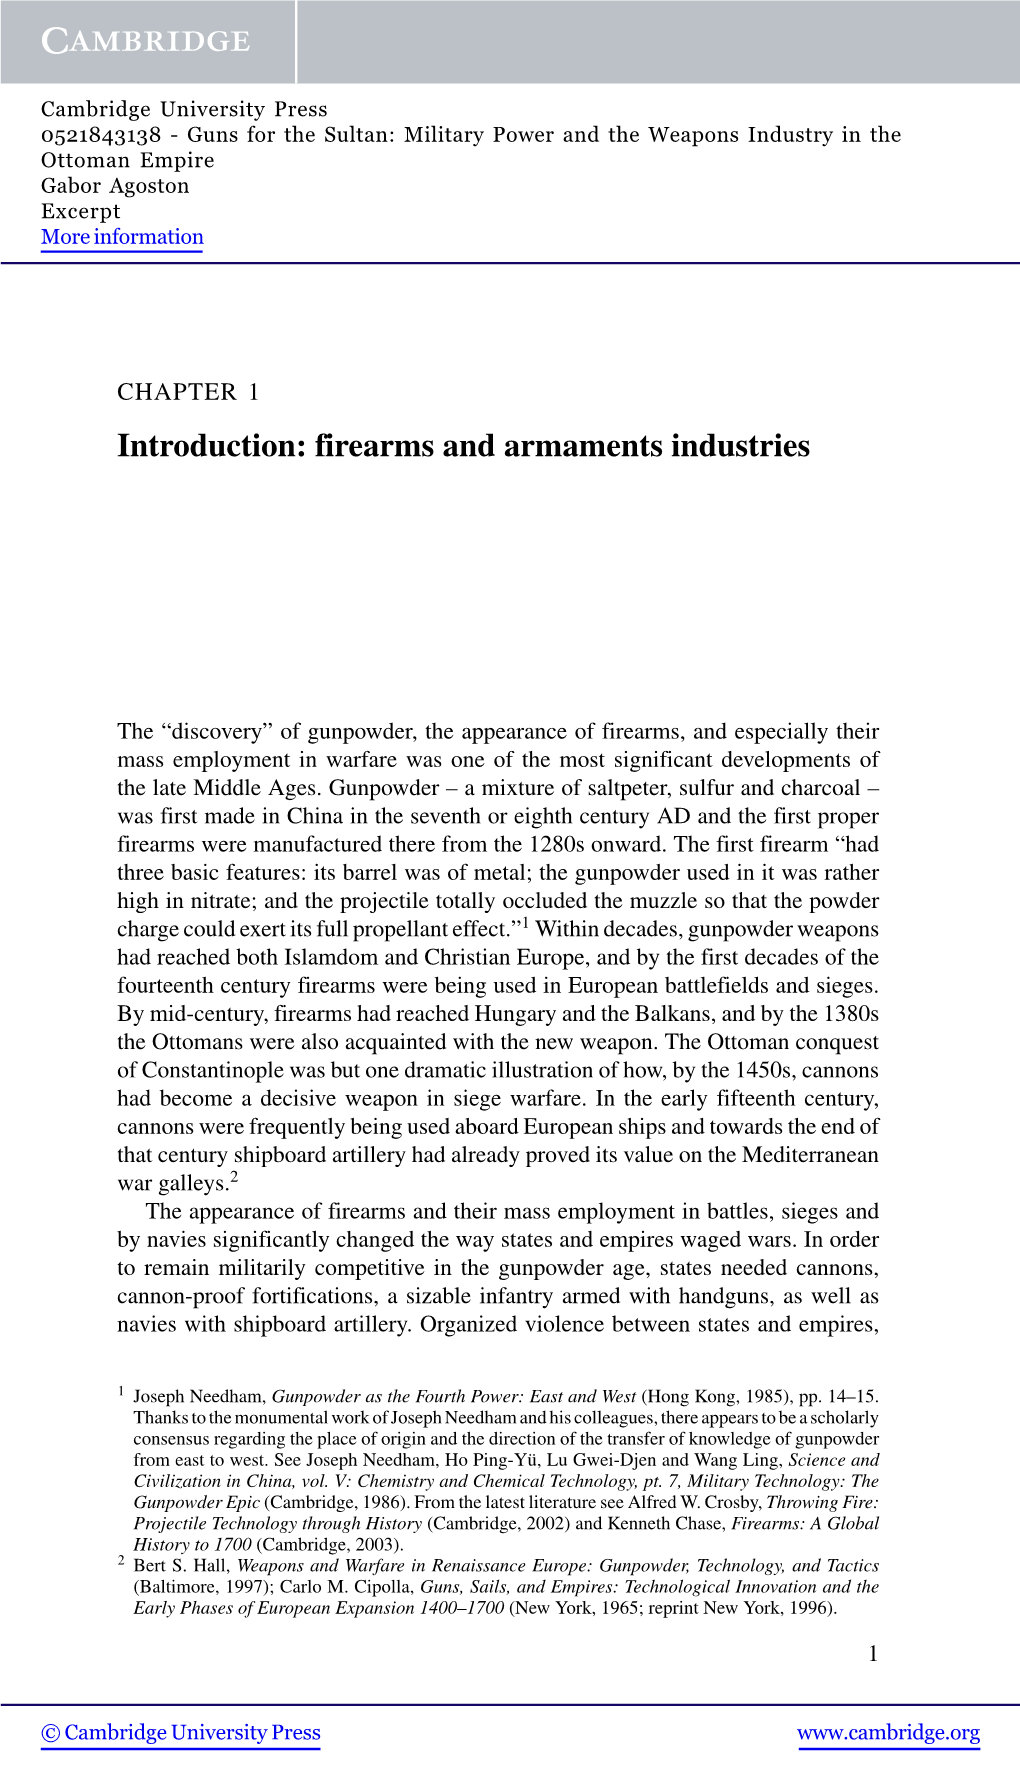 Firearms and Armaments Industries